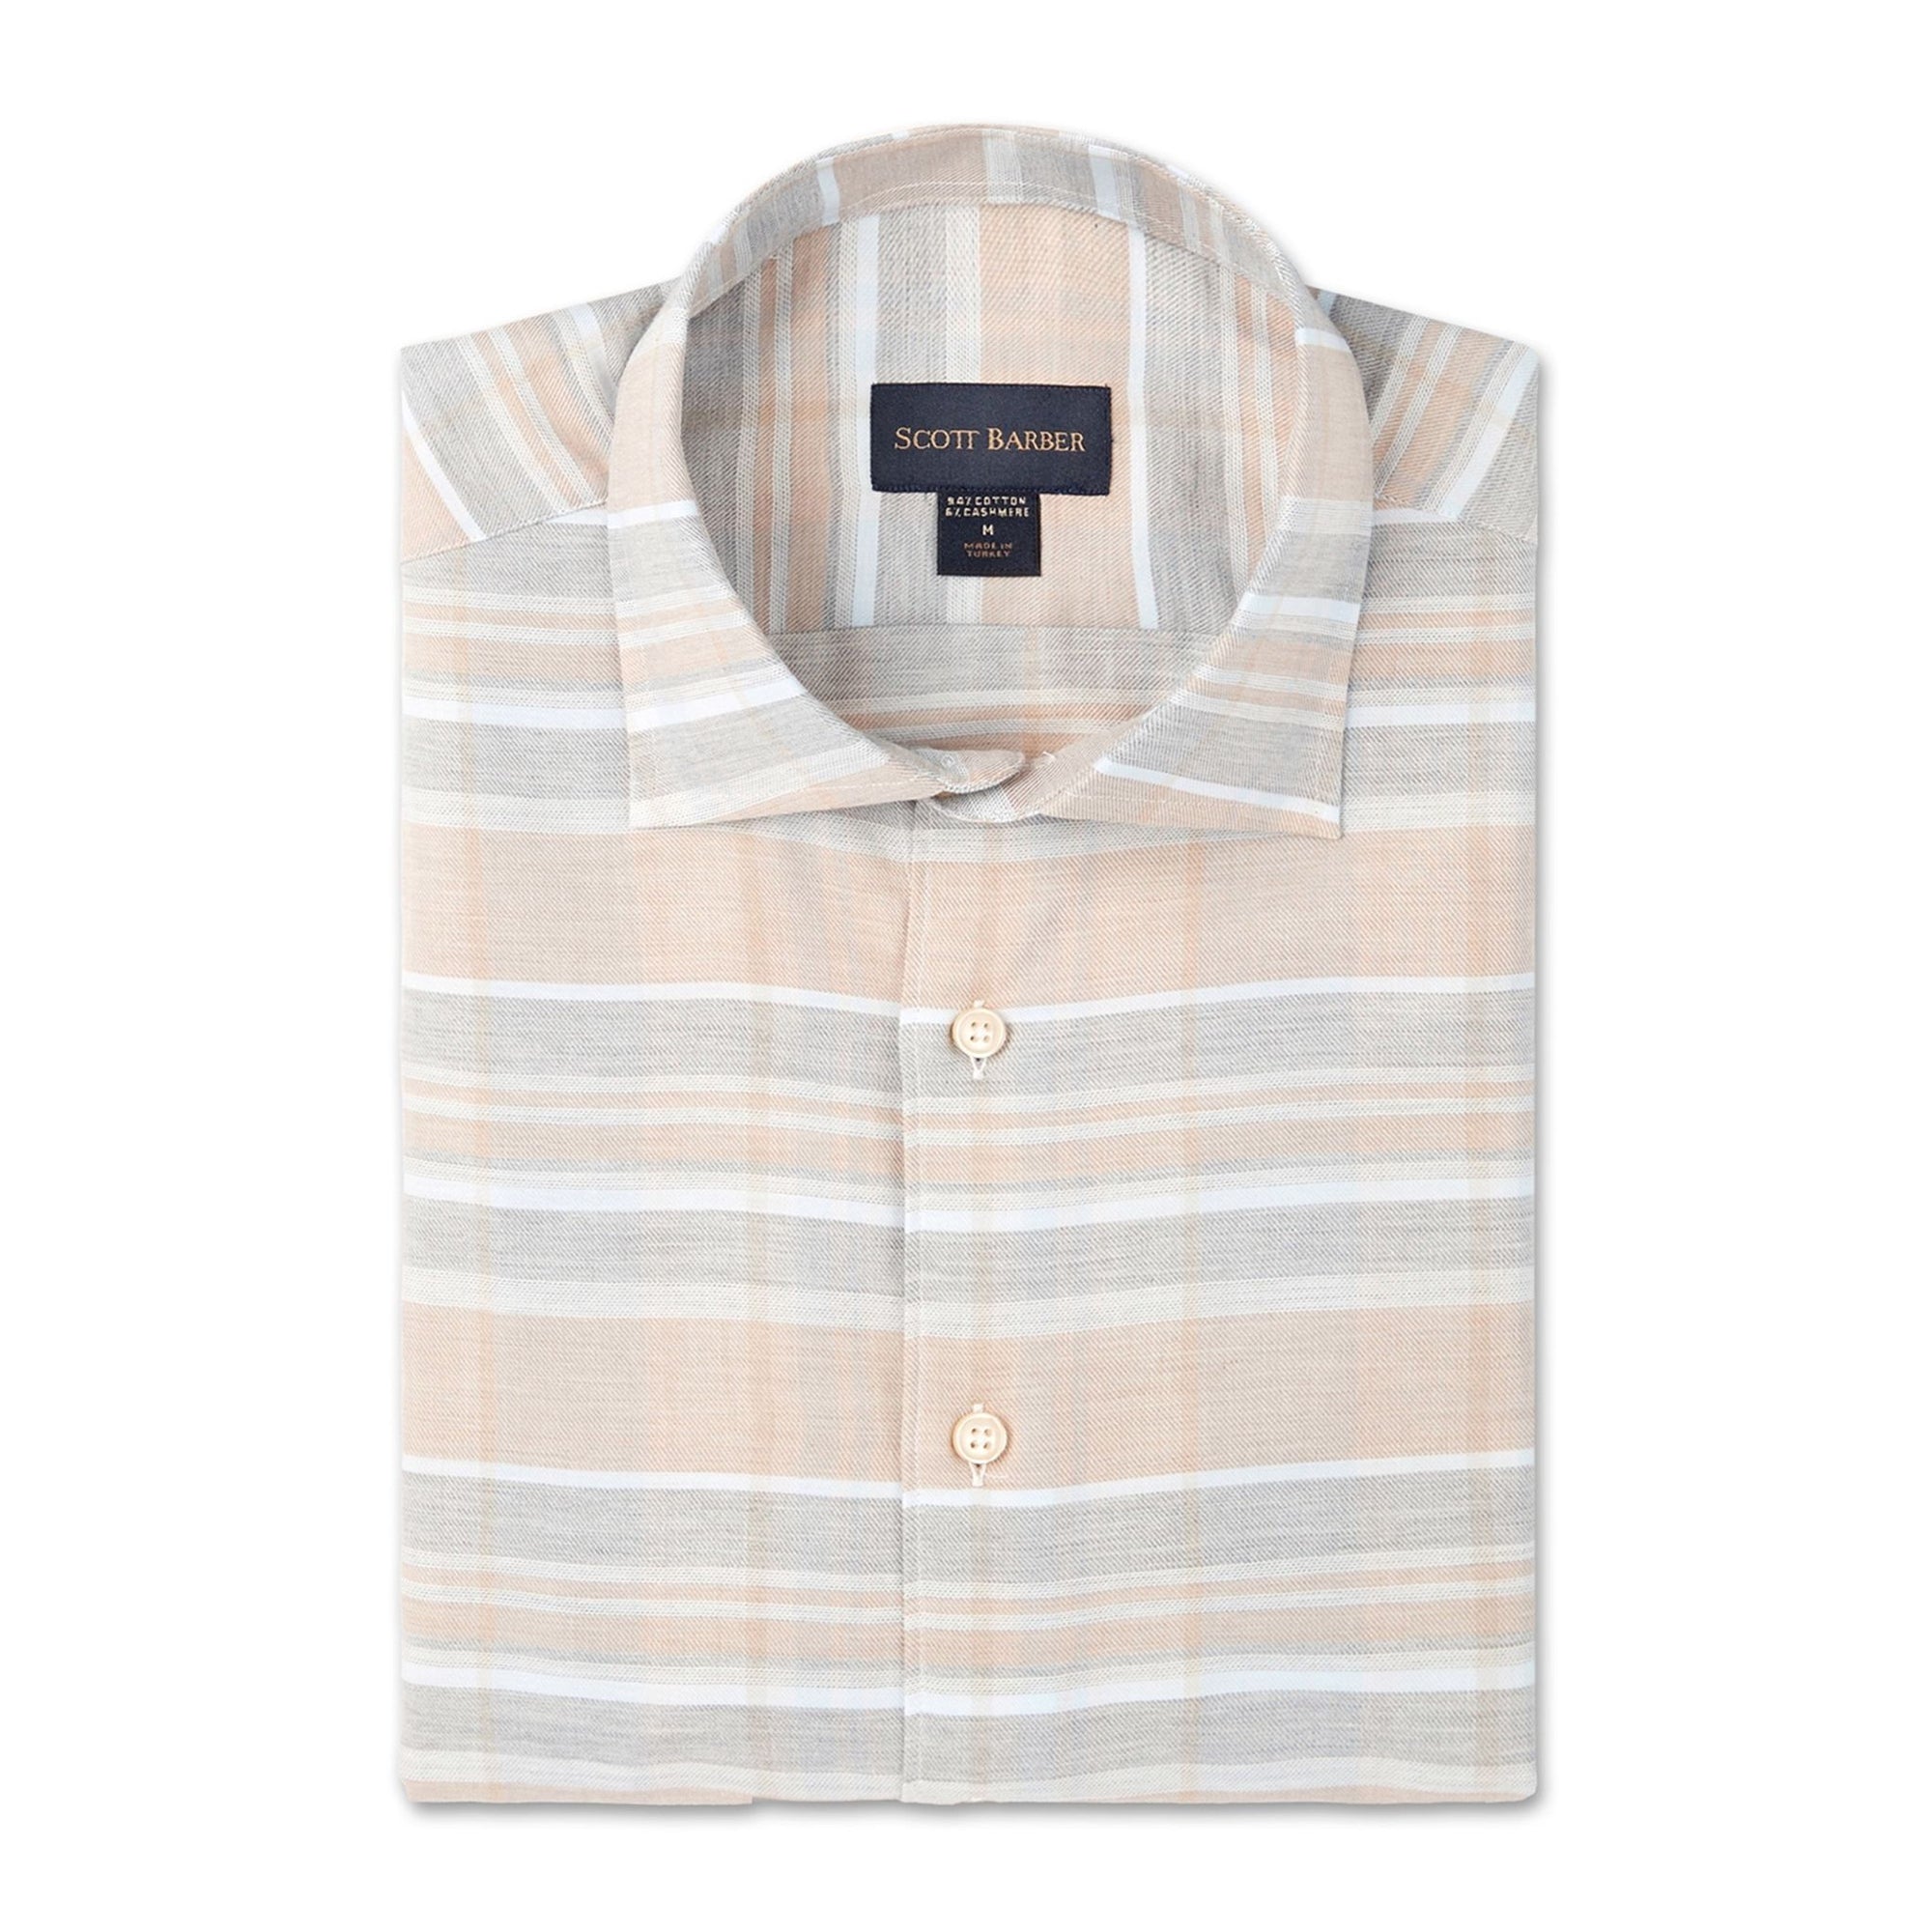 Shadow Plaid Cotton and Cashmere Sport Shirt in Khaki and Grey by Scott Barber